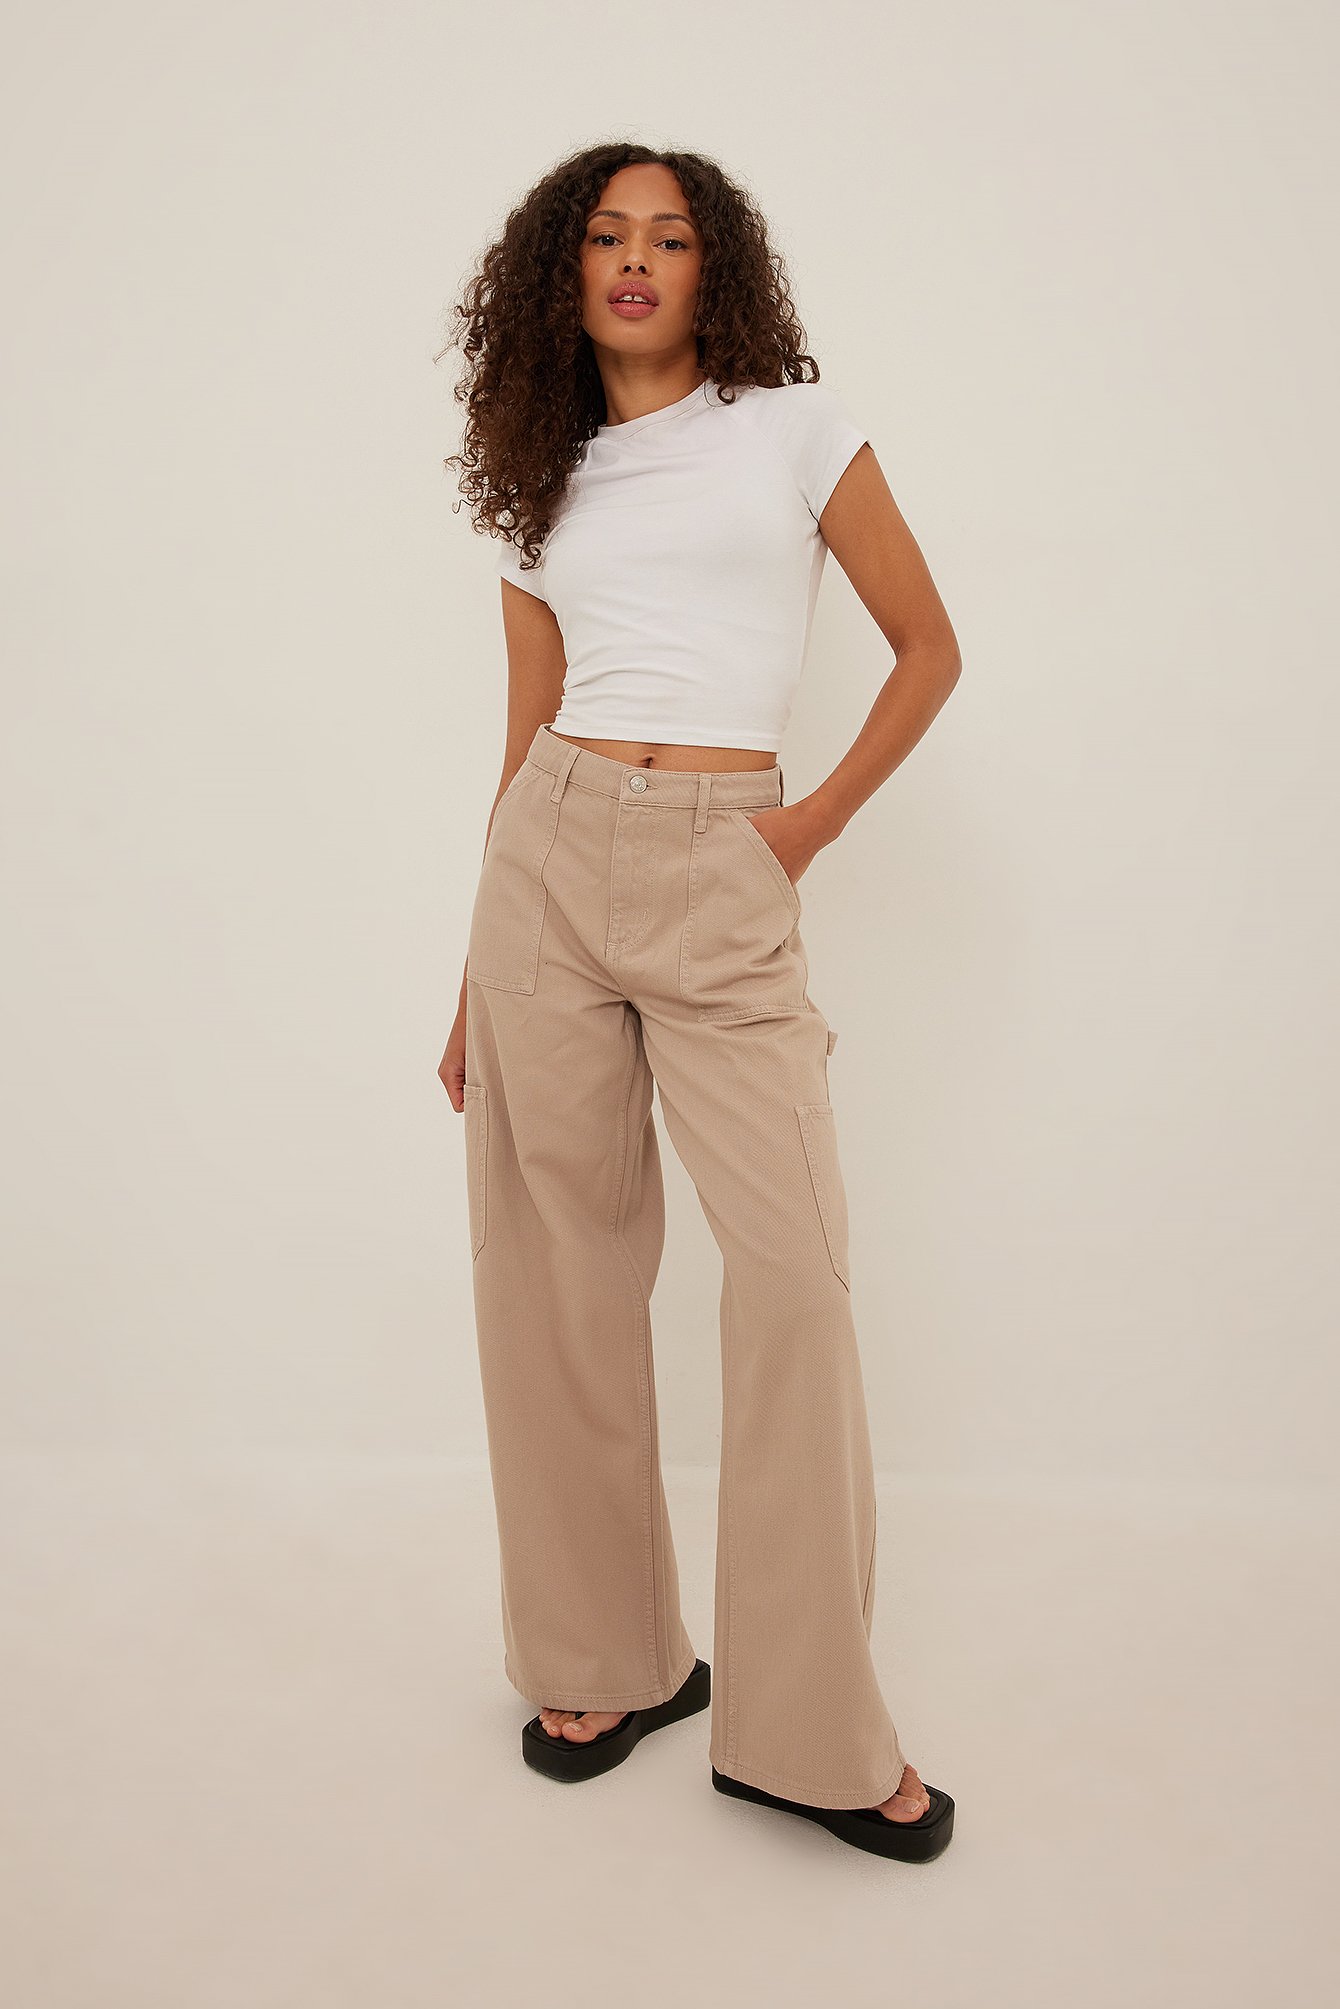 Loose Fit Cardo Pants Outfit